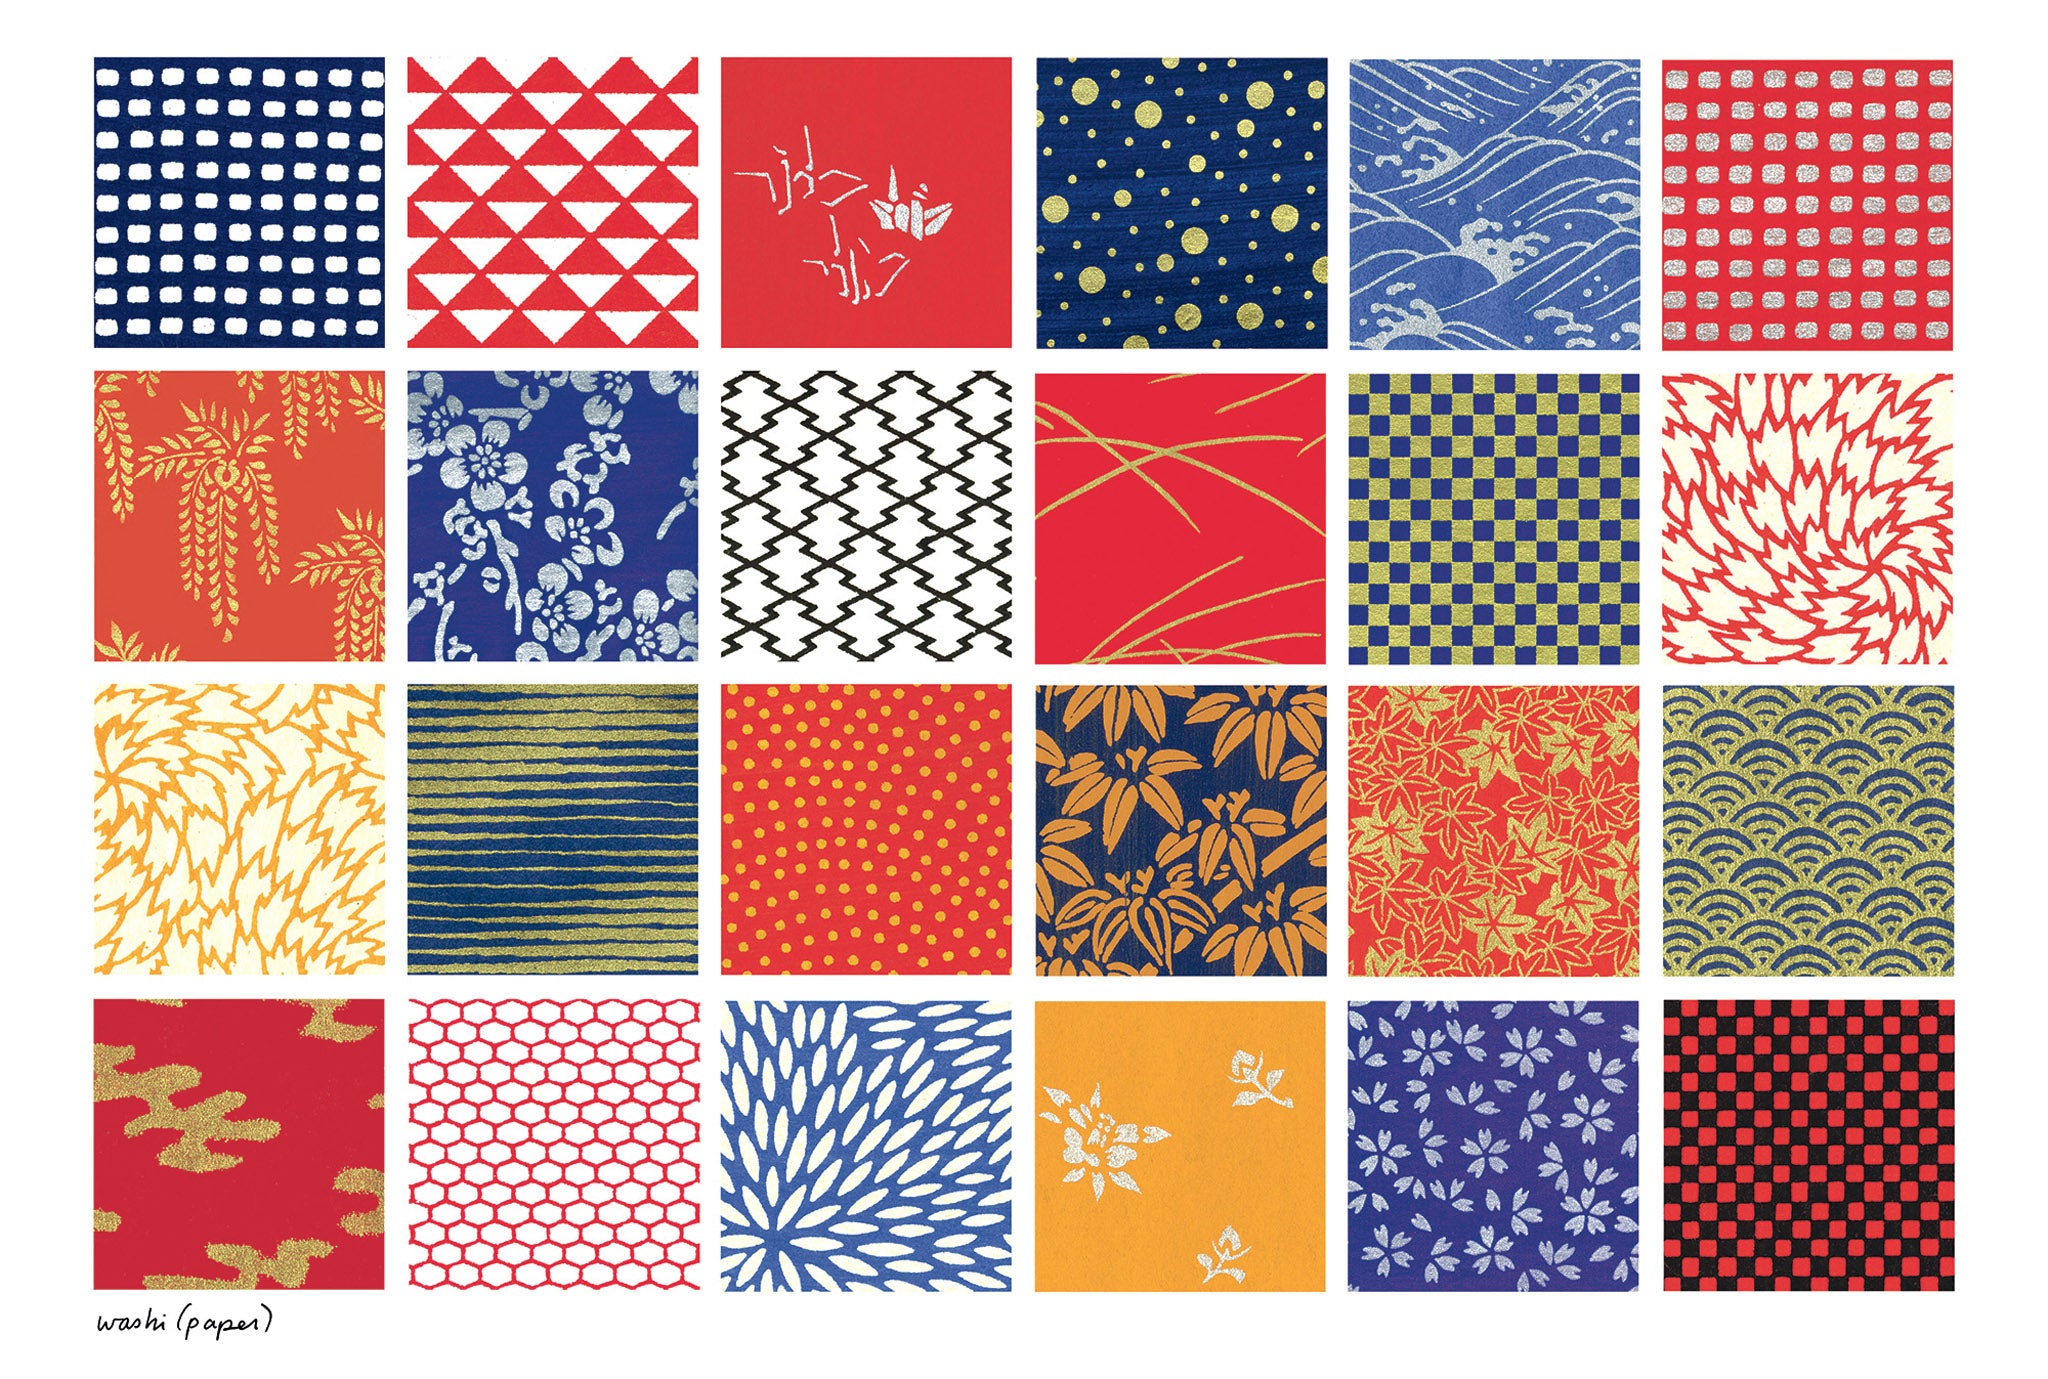 Washi paper designs from Japan